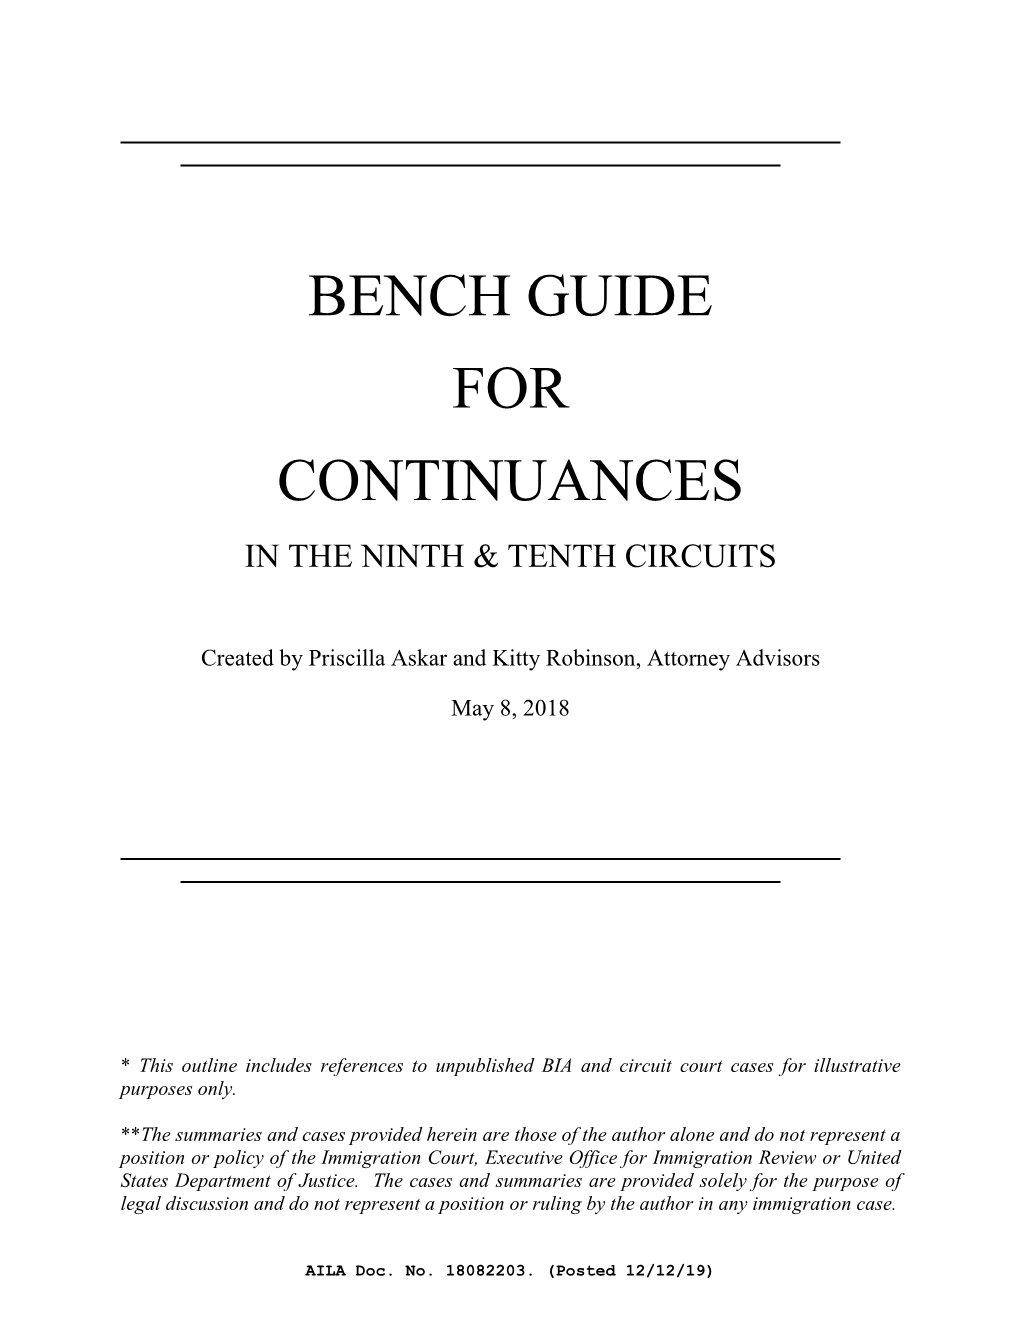 Bench Guide for Continuances in the Ninth & Tenth Circuits